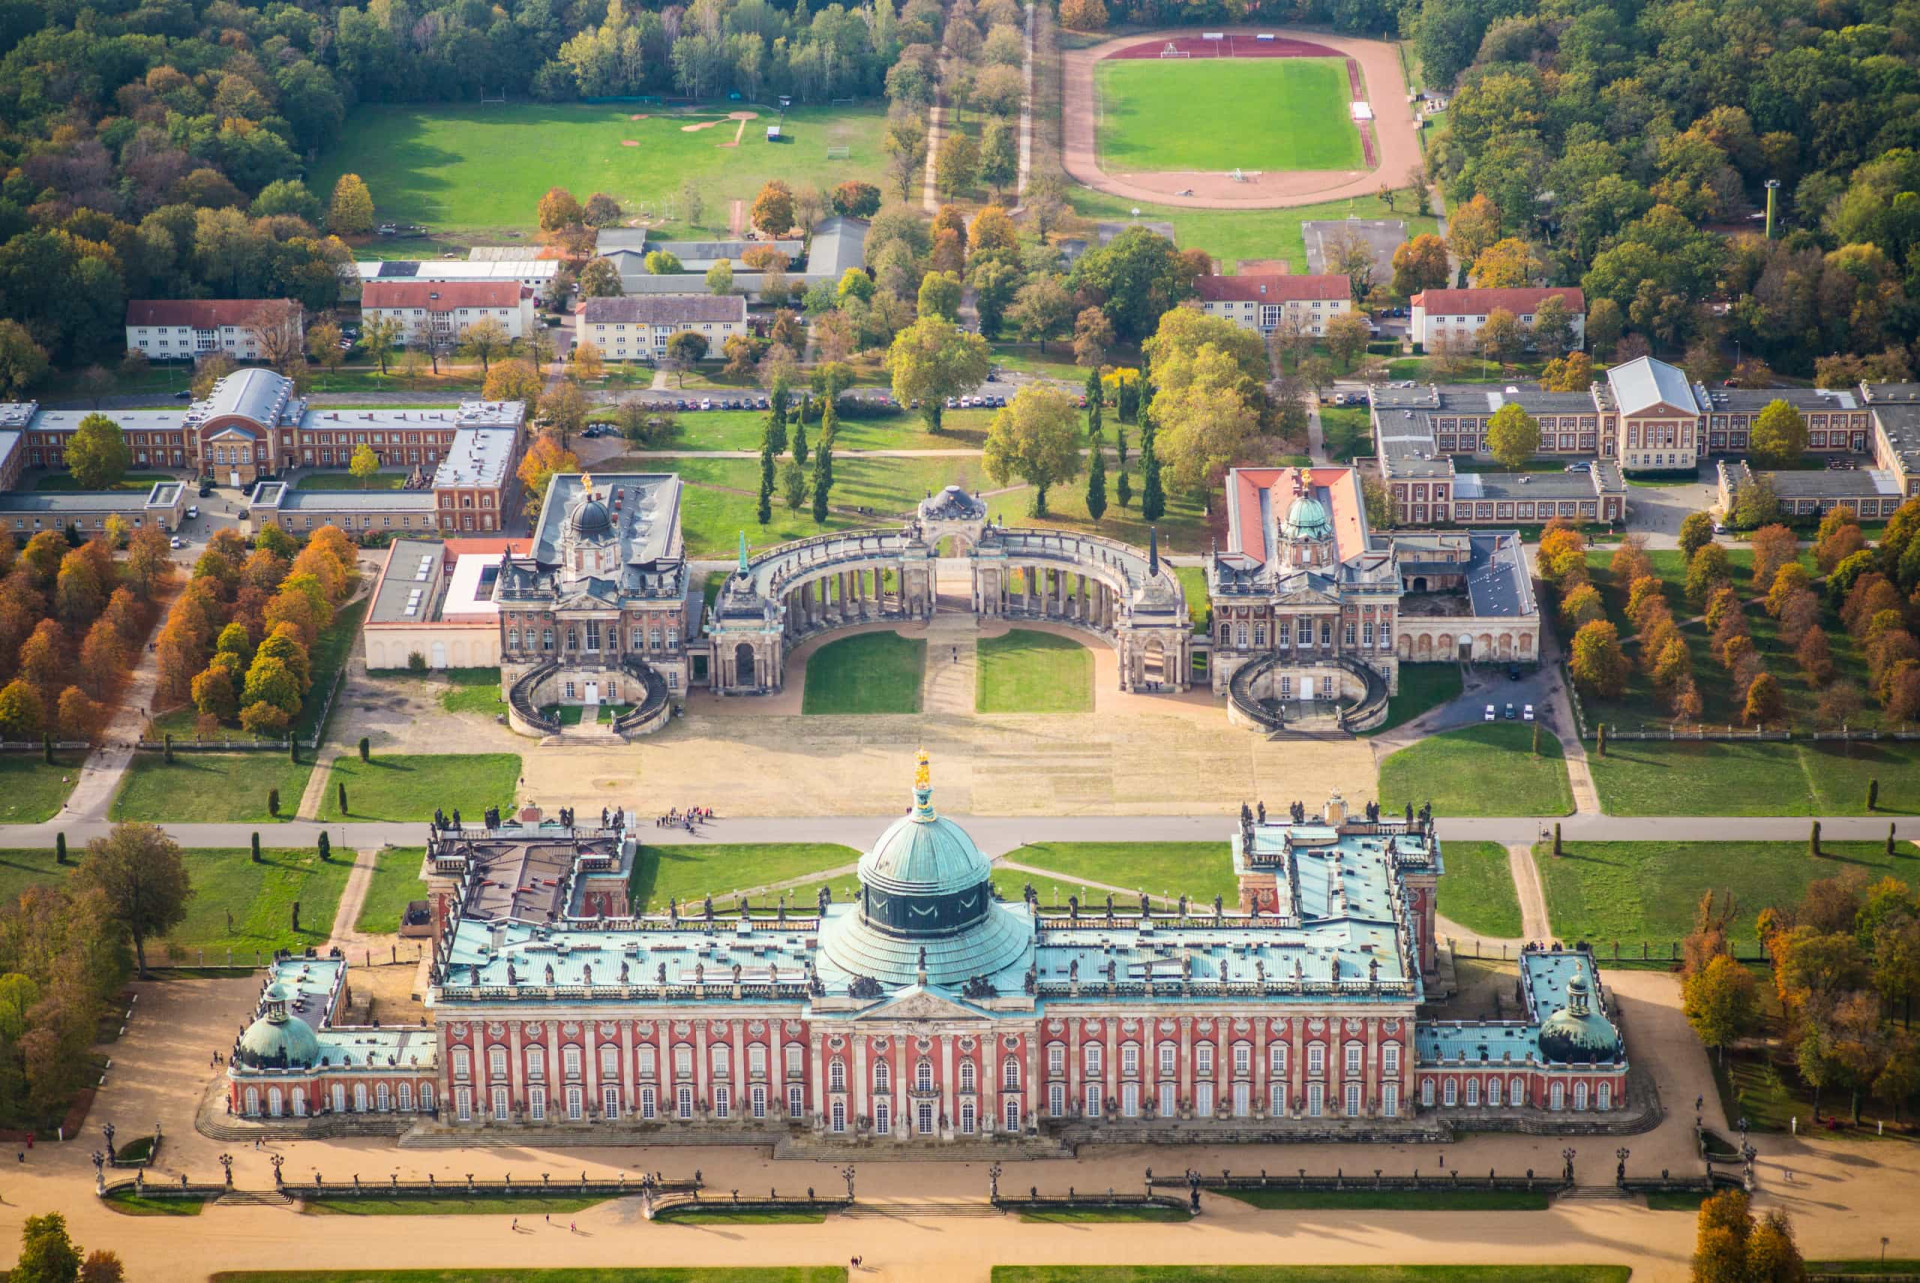 <p>Located at Potsdam, Sanssouci Palace was commissioned by Frederick the Great as a summer palace and completed in 1774. Sanssouci is often compared to Versailles for opulence and grandeur, and for the magnificent grounds it is set in.</p><p><a href="https://www.msn.com/en-us/community/channel/vid-7xx8mnucu55yw63we9va2gwr7uihbxwc68fxqp25x6tg4ftibpra?cvid=94631541bc0f4f89bfd59158d696ad7e">Follow us and access great exclusive content every day</a></p>